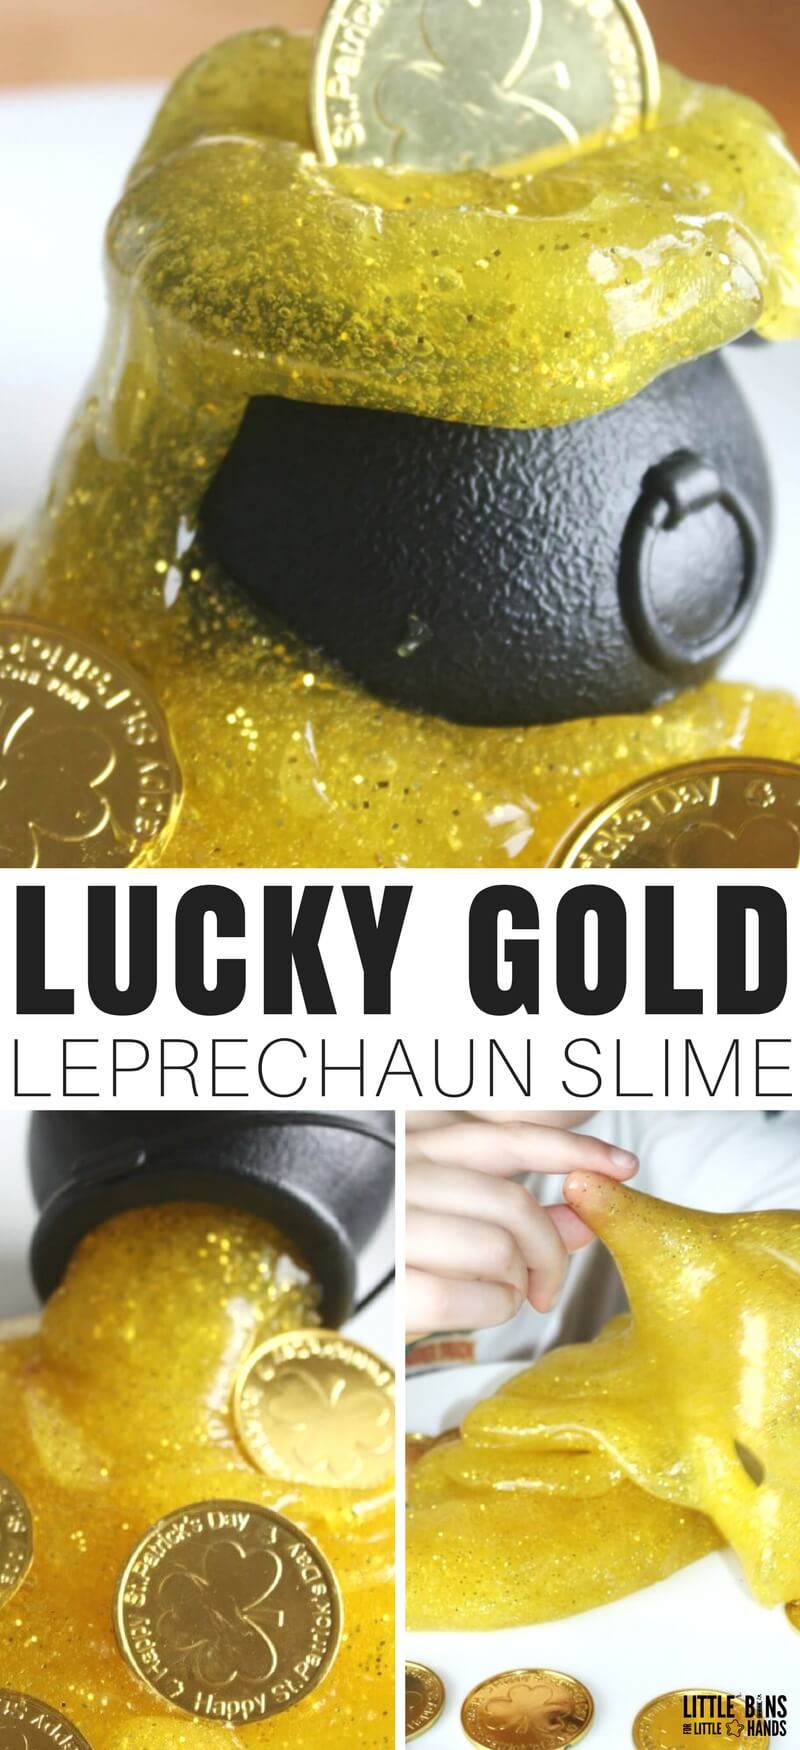 Are you eager to catch a leprechaun this St. Patrick's Day? Then you obviously need to make this gold sparkle slime recipe! It's a quick and easy way to dress up your leprechaun trap this season. We love making homemade slime for any occasion and our lucky gold sparkle slime is no exception. 